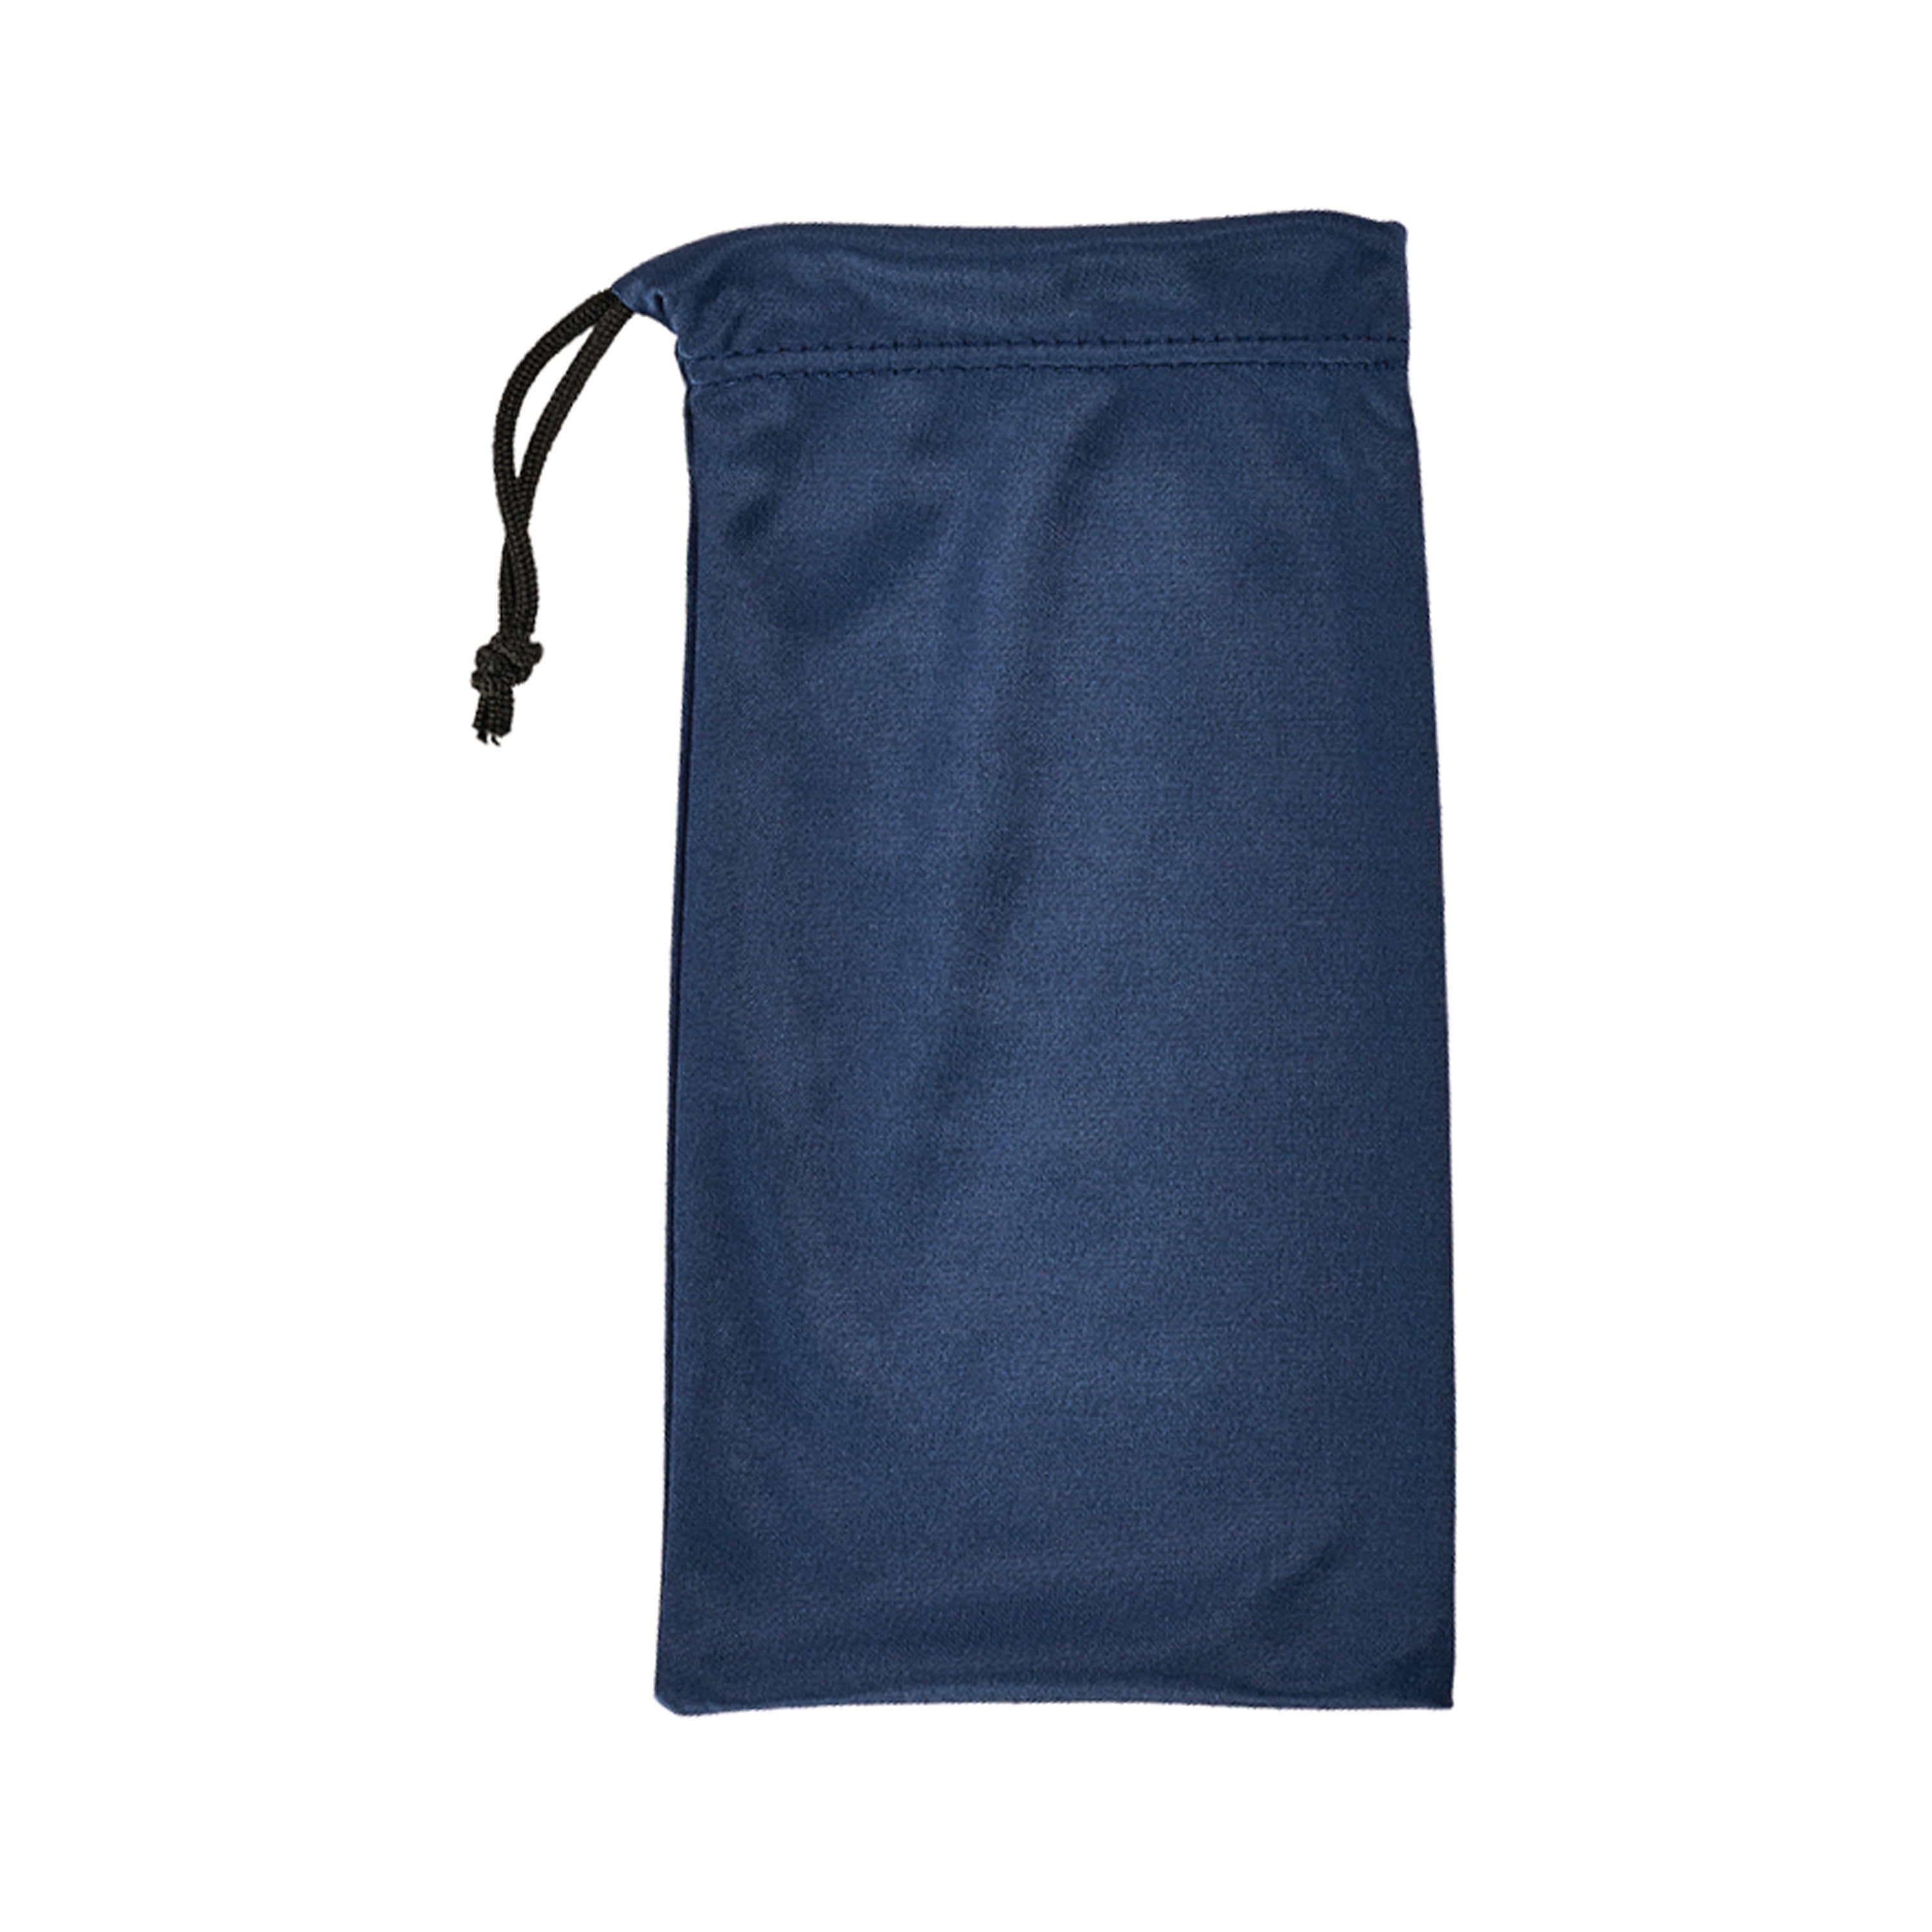 Purity™ Microfiber Pouches